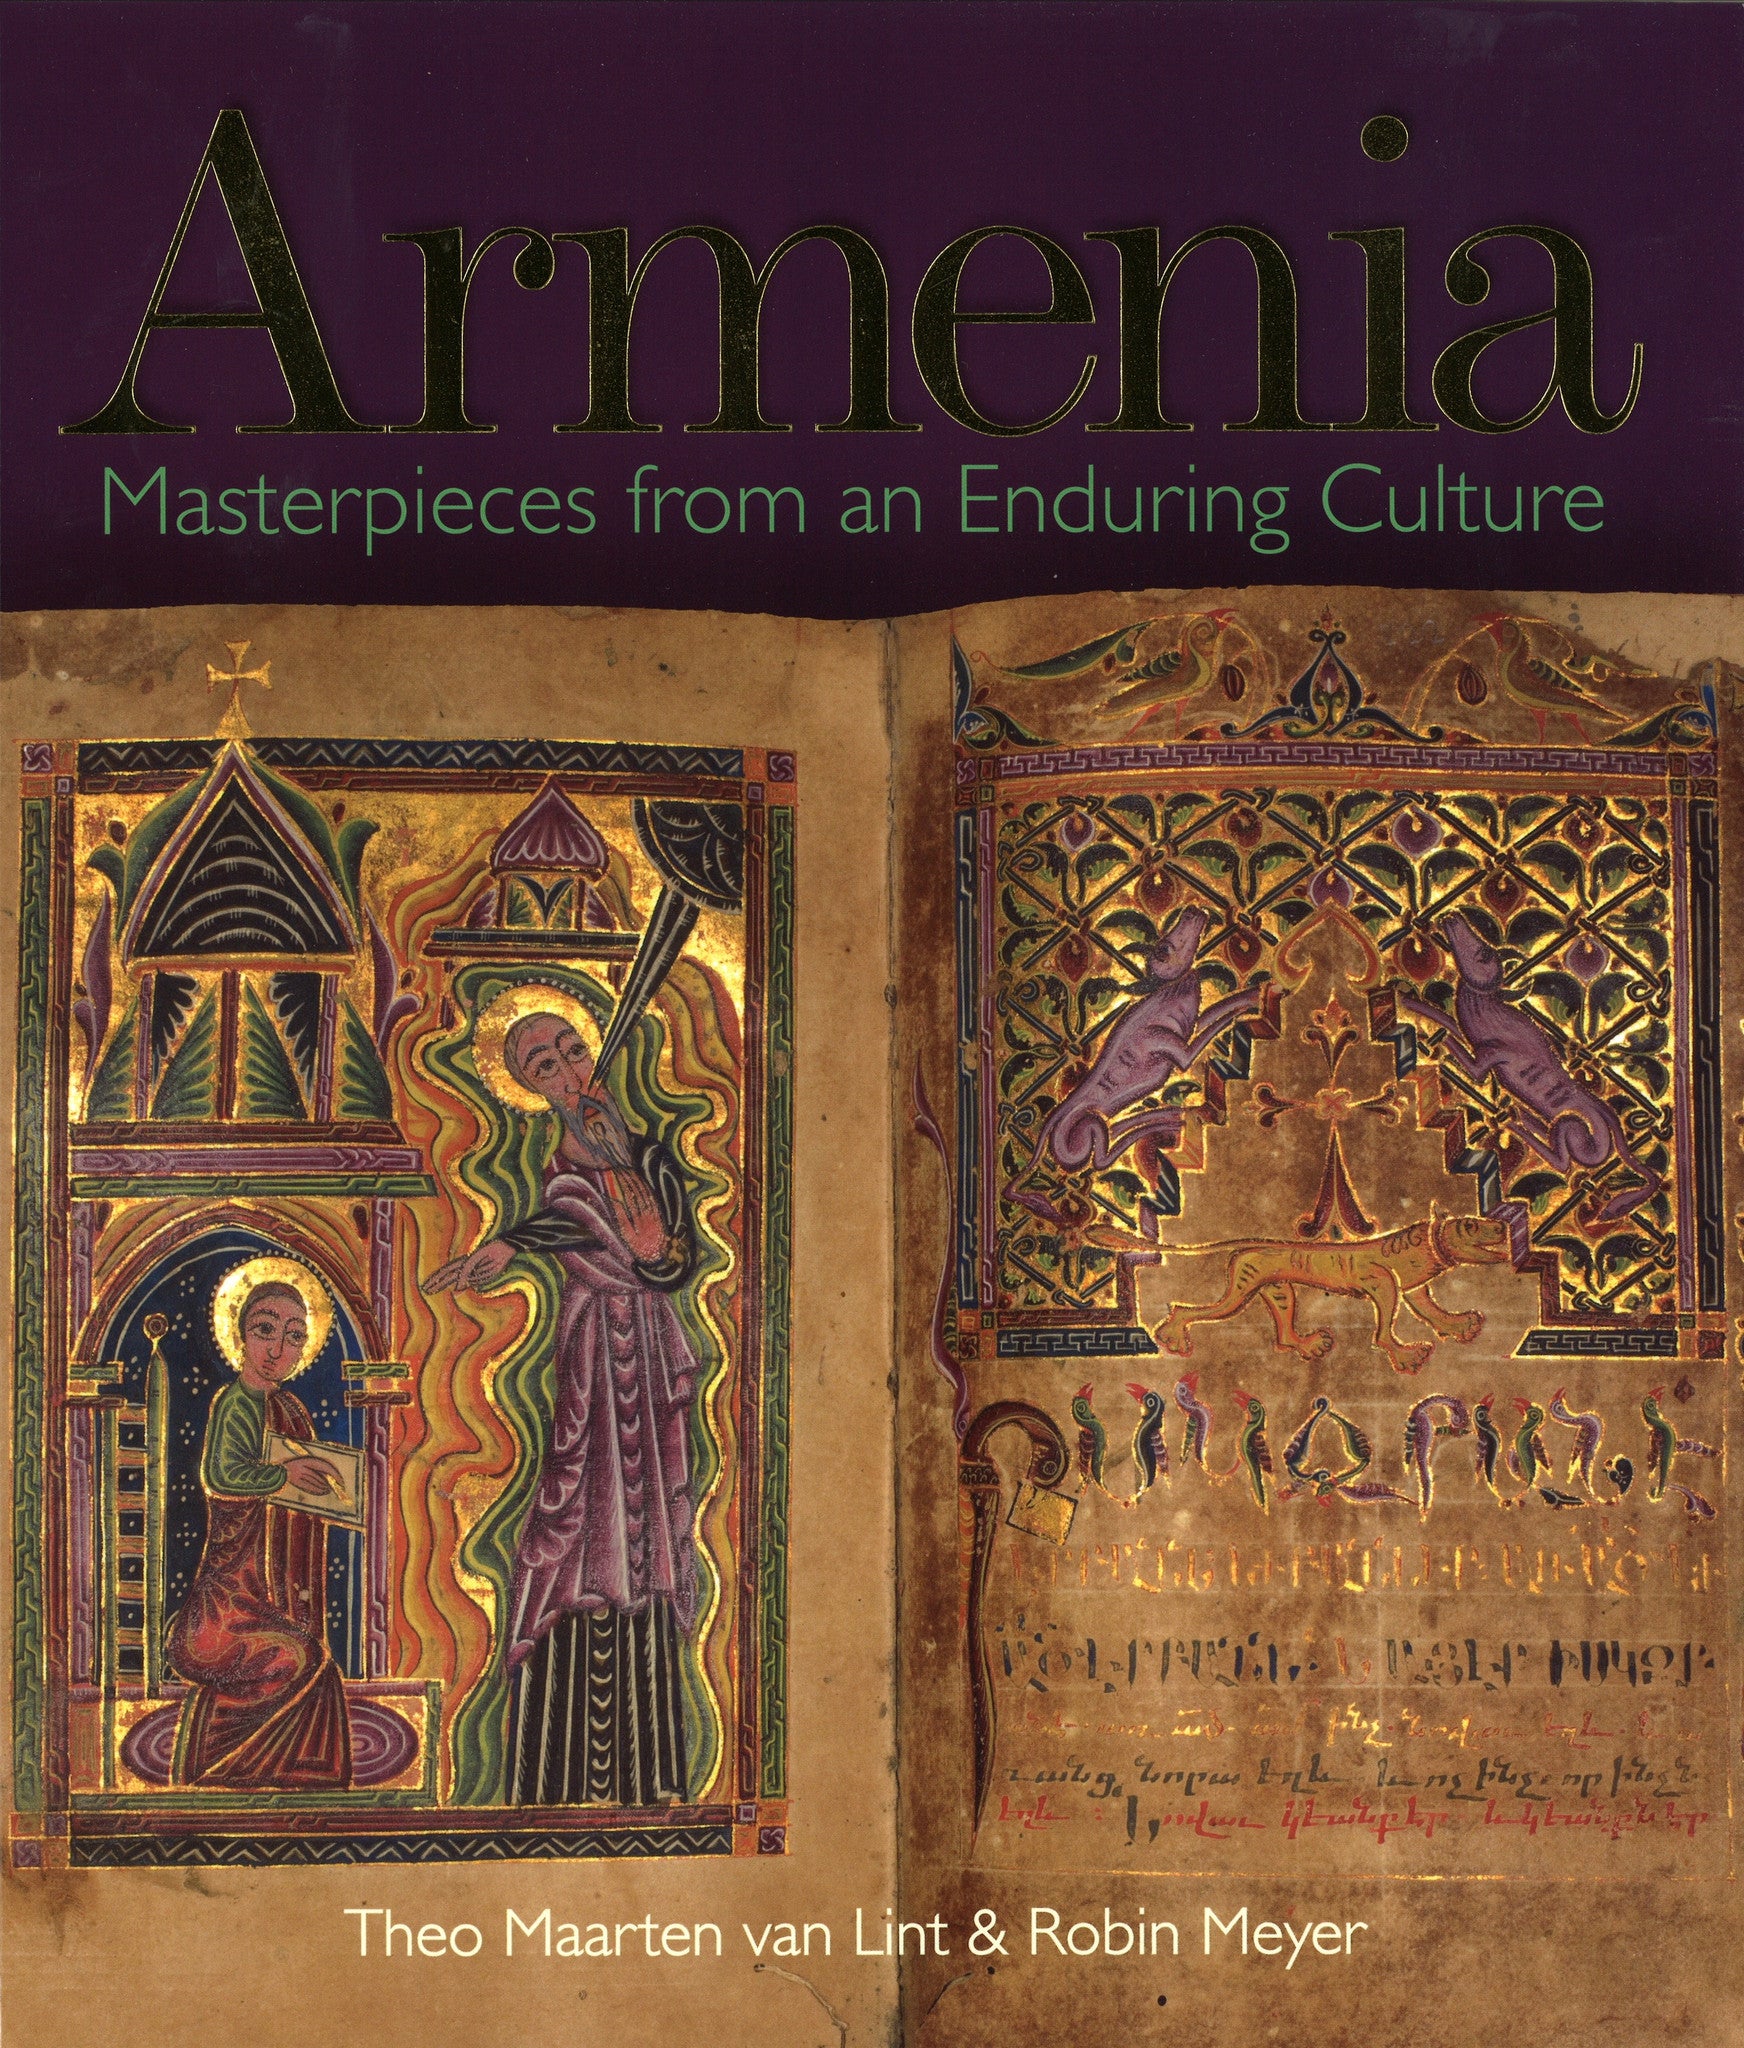 ARMENIA: Masterpieces from an Enduring Culture